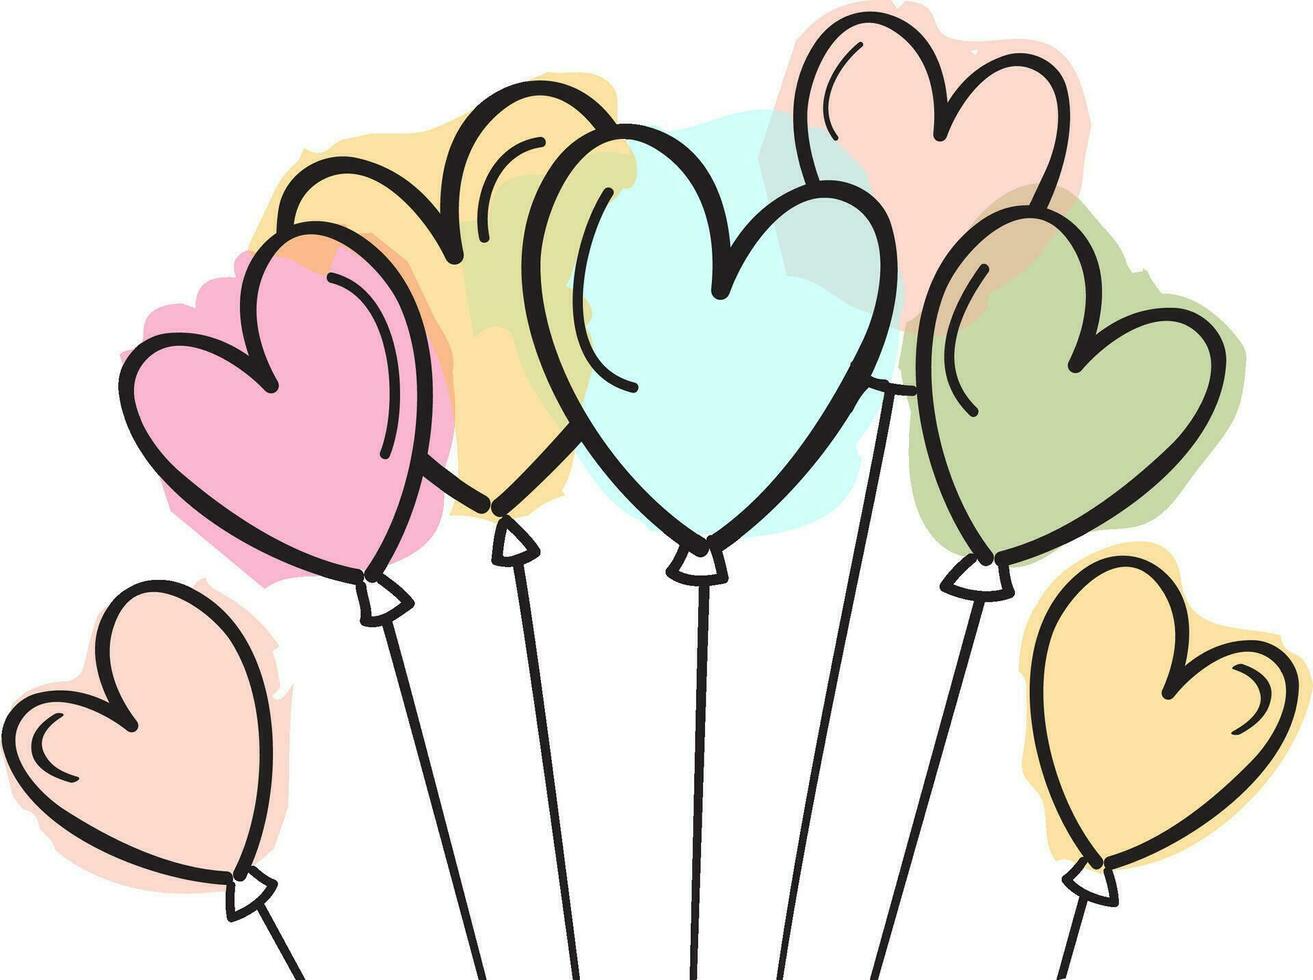 Flat illustration of colorful heart shaped Balloons. vector